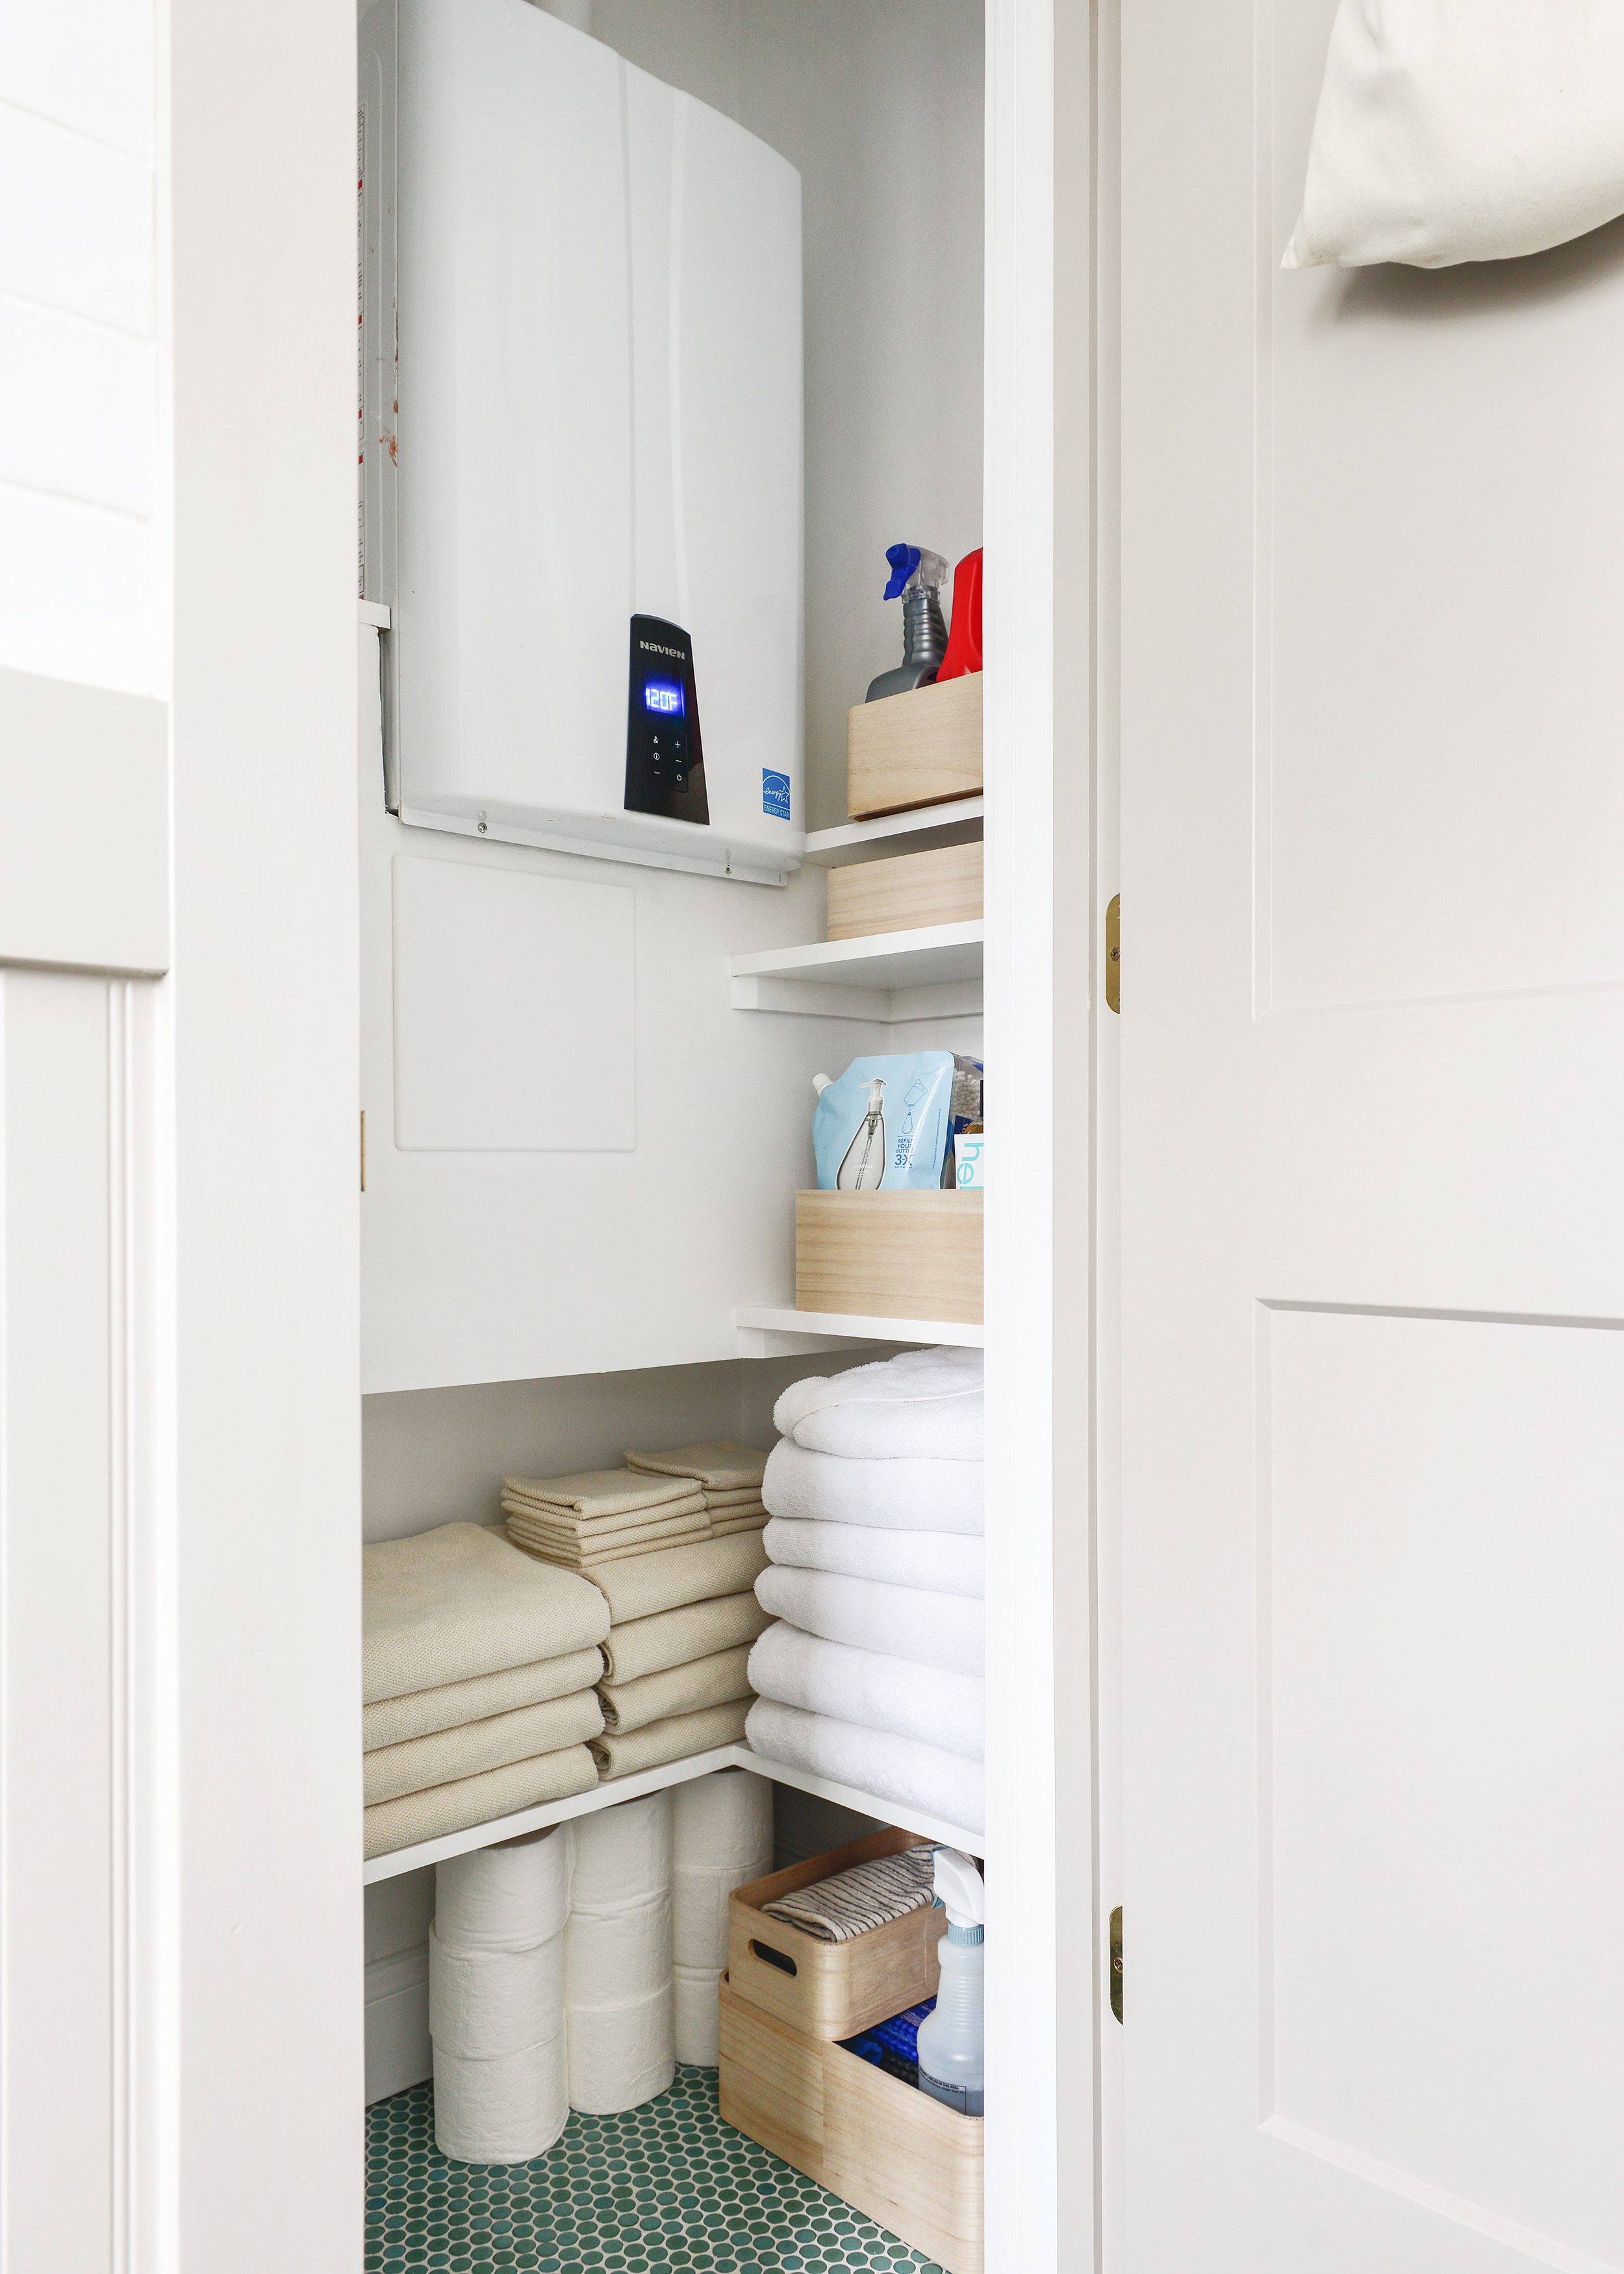 A finished linen closet contains a hot water heater and loads of built in storage // via Yellow Brick Home